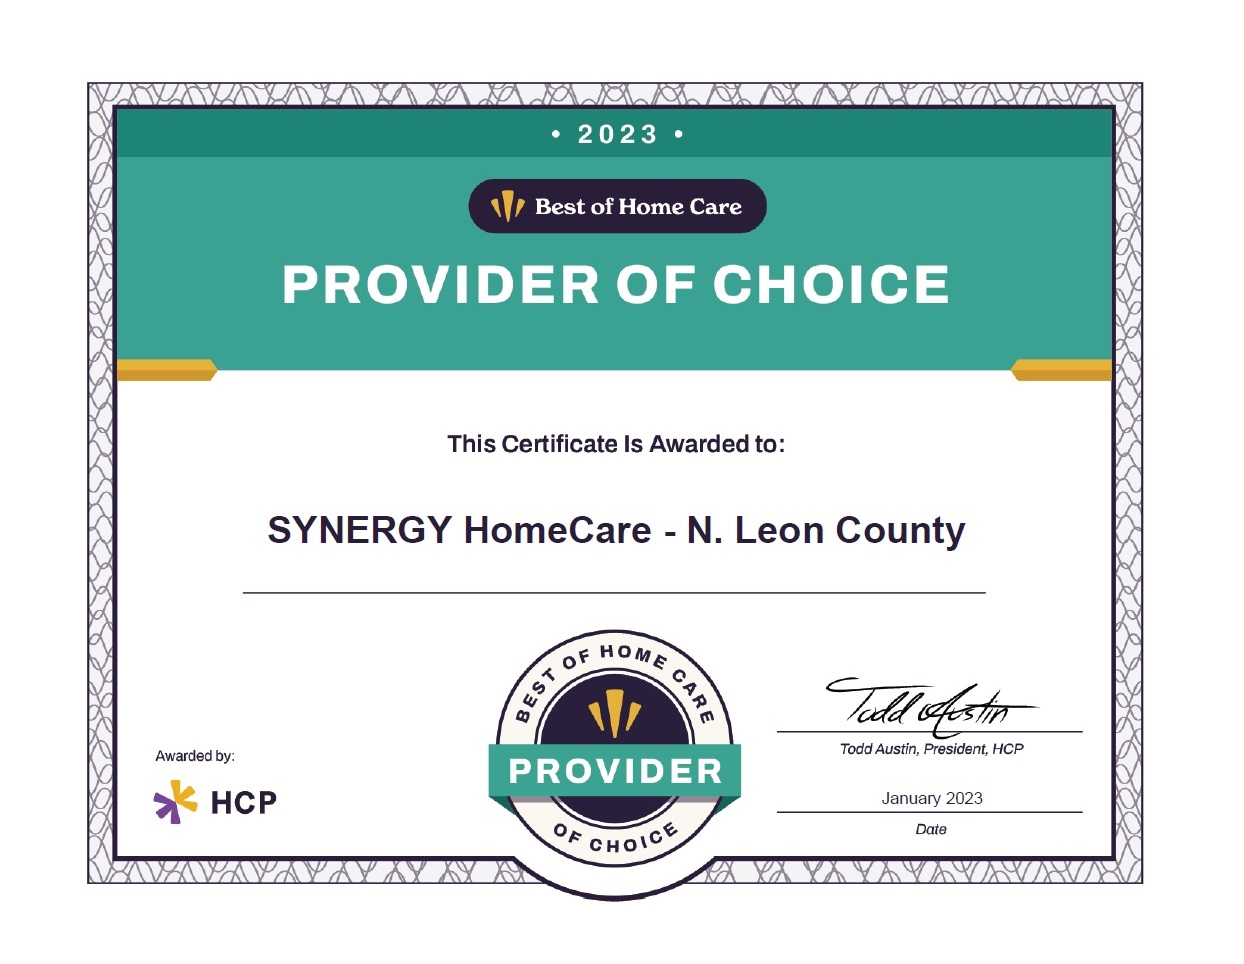 SYNERGY HomeCare of North Leon County image